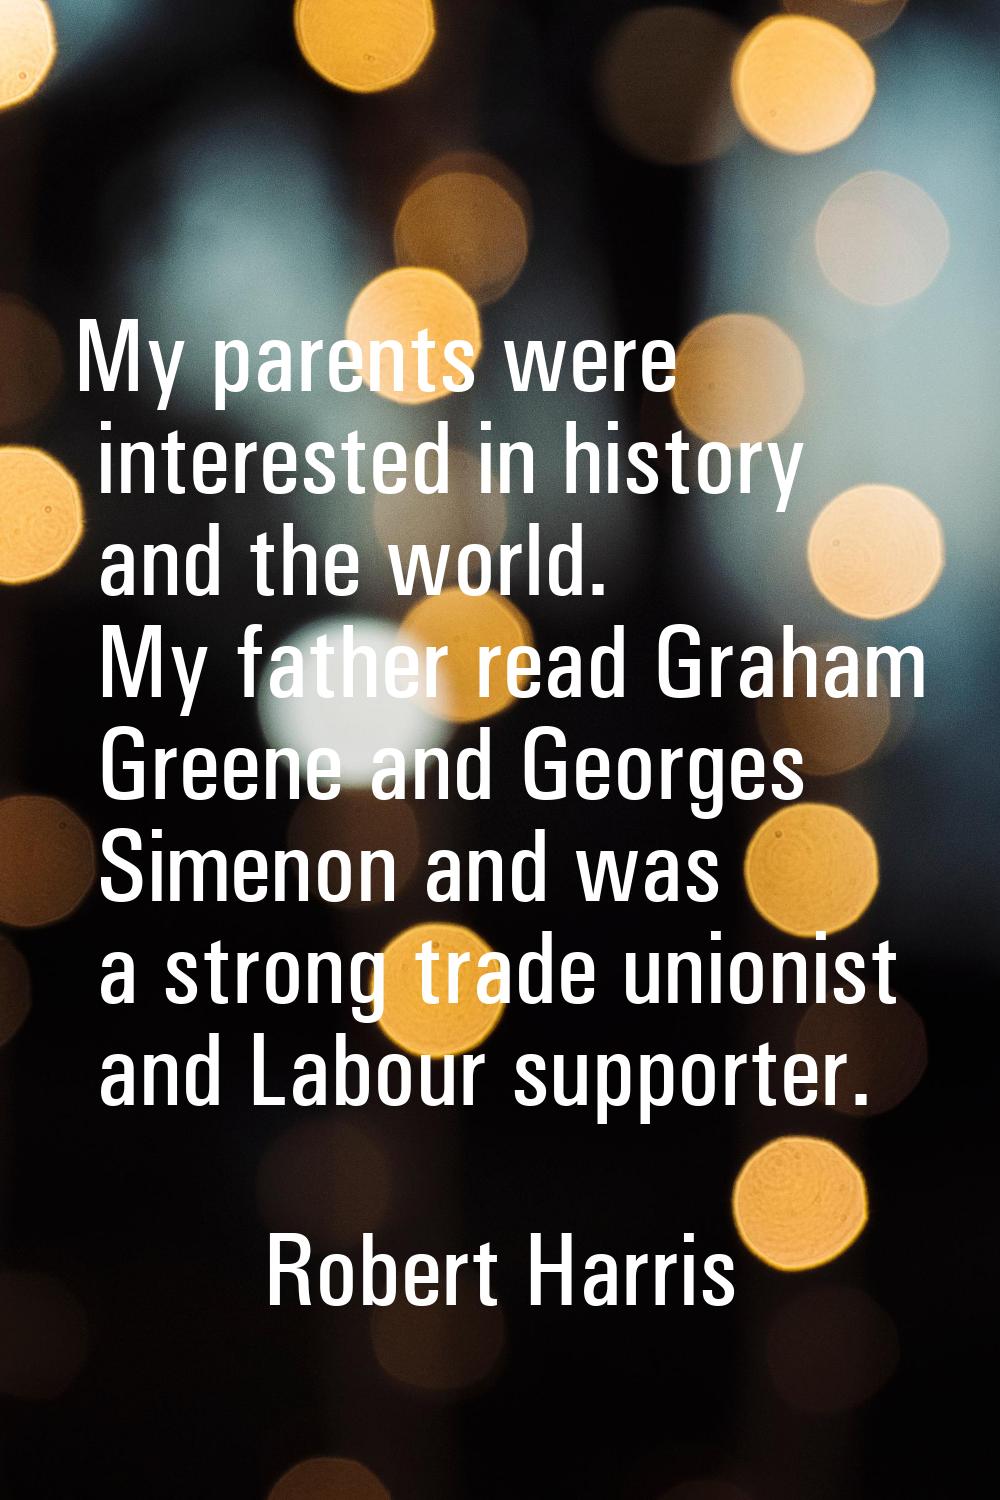 My parents were interested in history and the world. My father read Graham Greene and Georges Simen